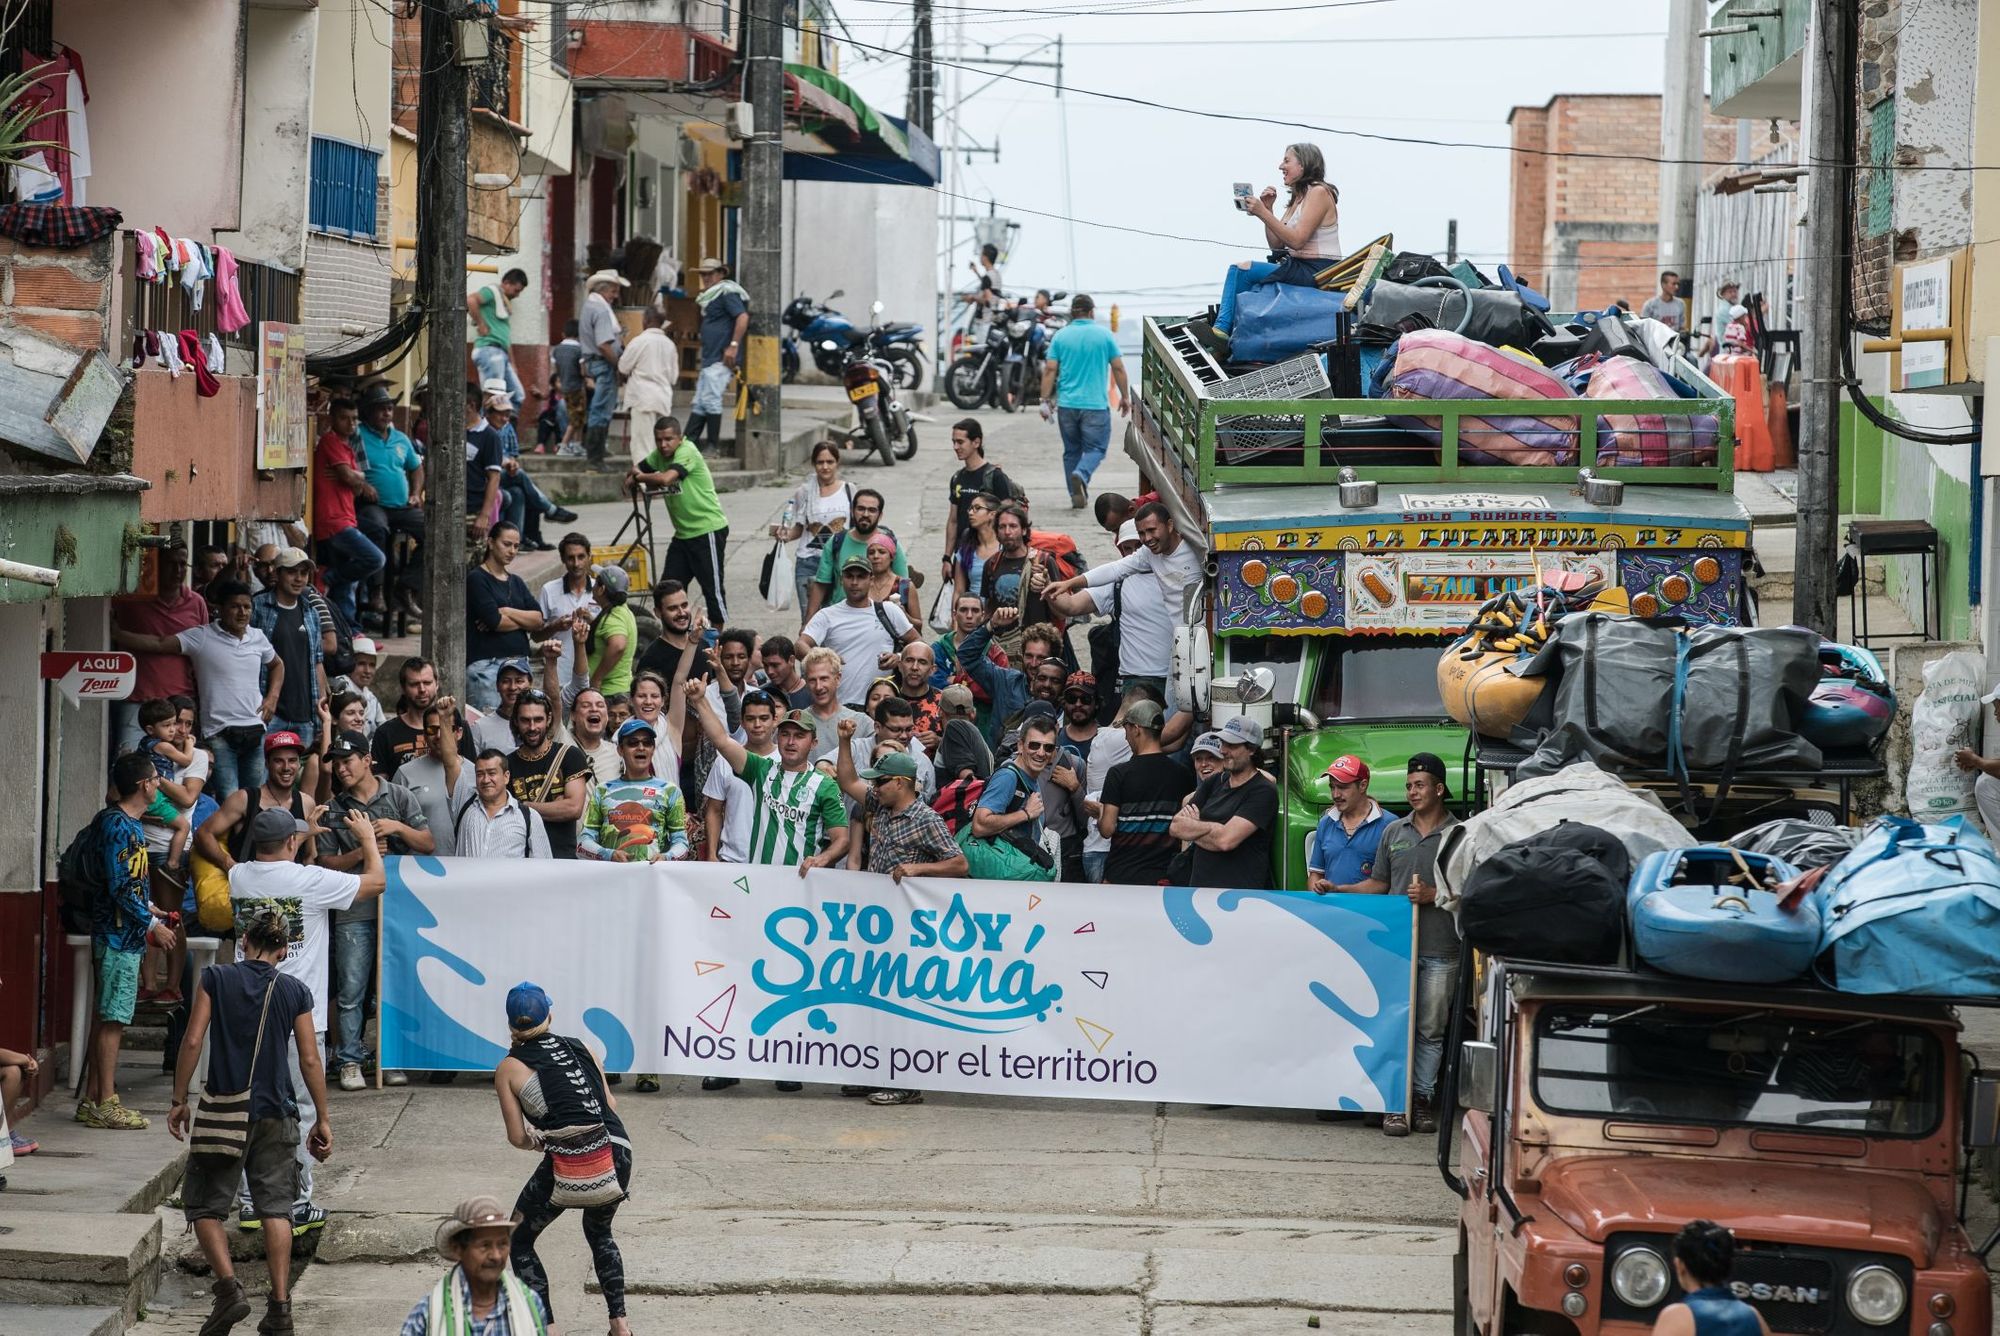 People celebrating at Samaná Fest, which was organised to promote support for the protection of the Samana River from damming